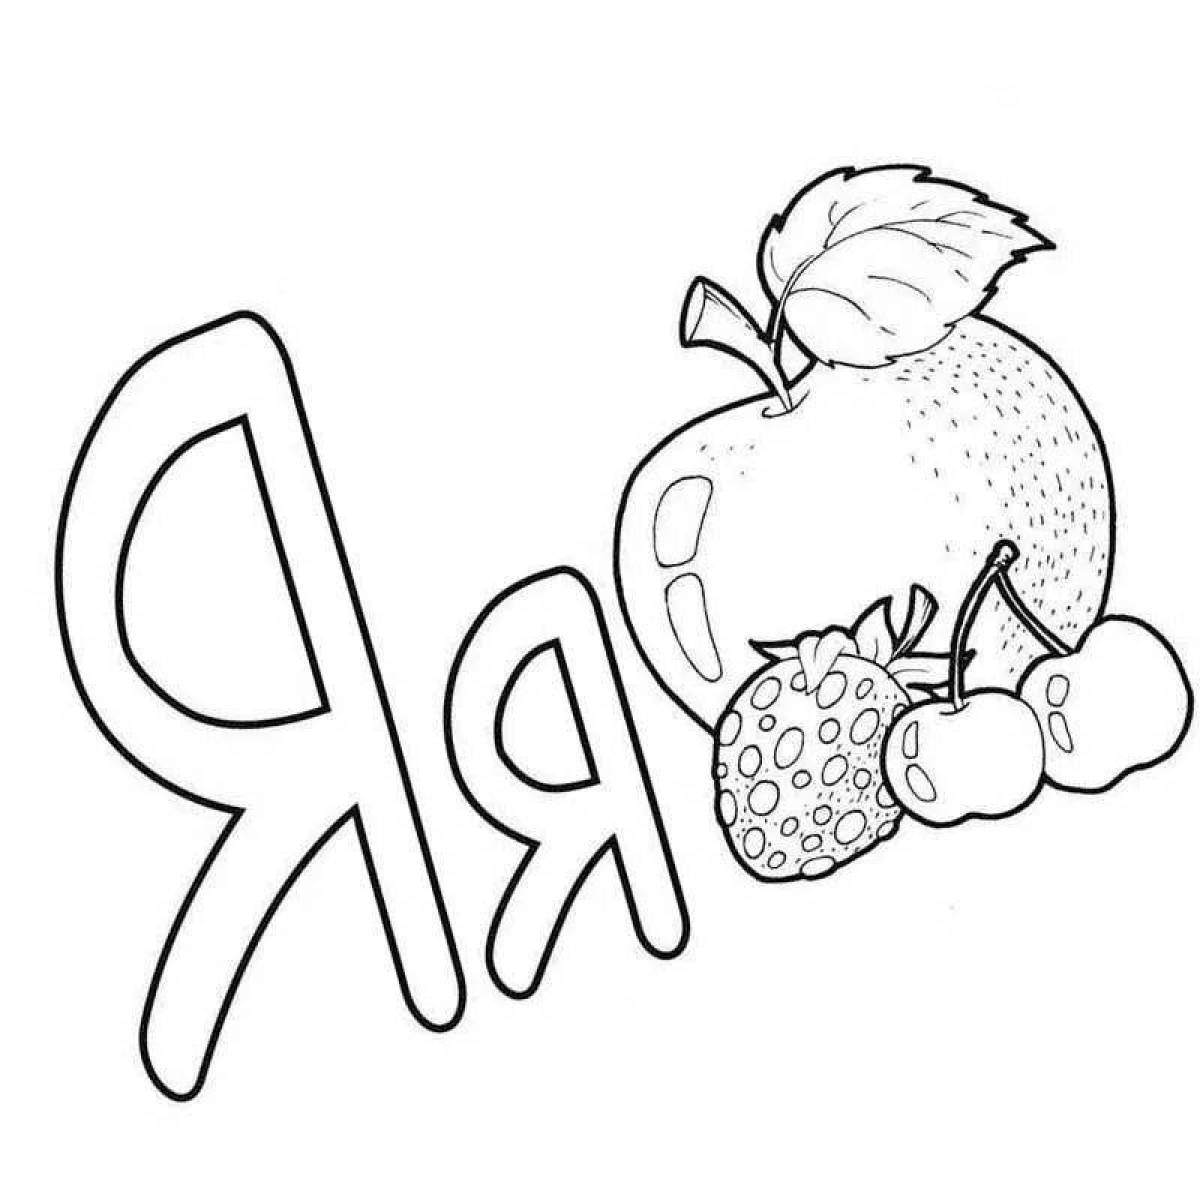 Abc laura animated coloring page